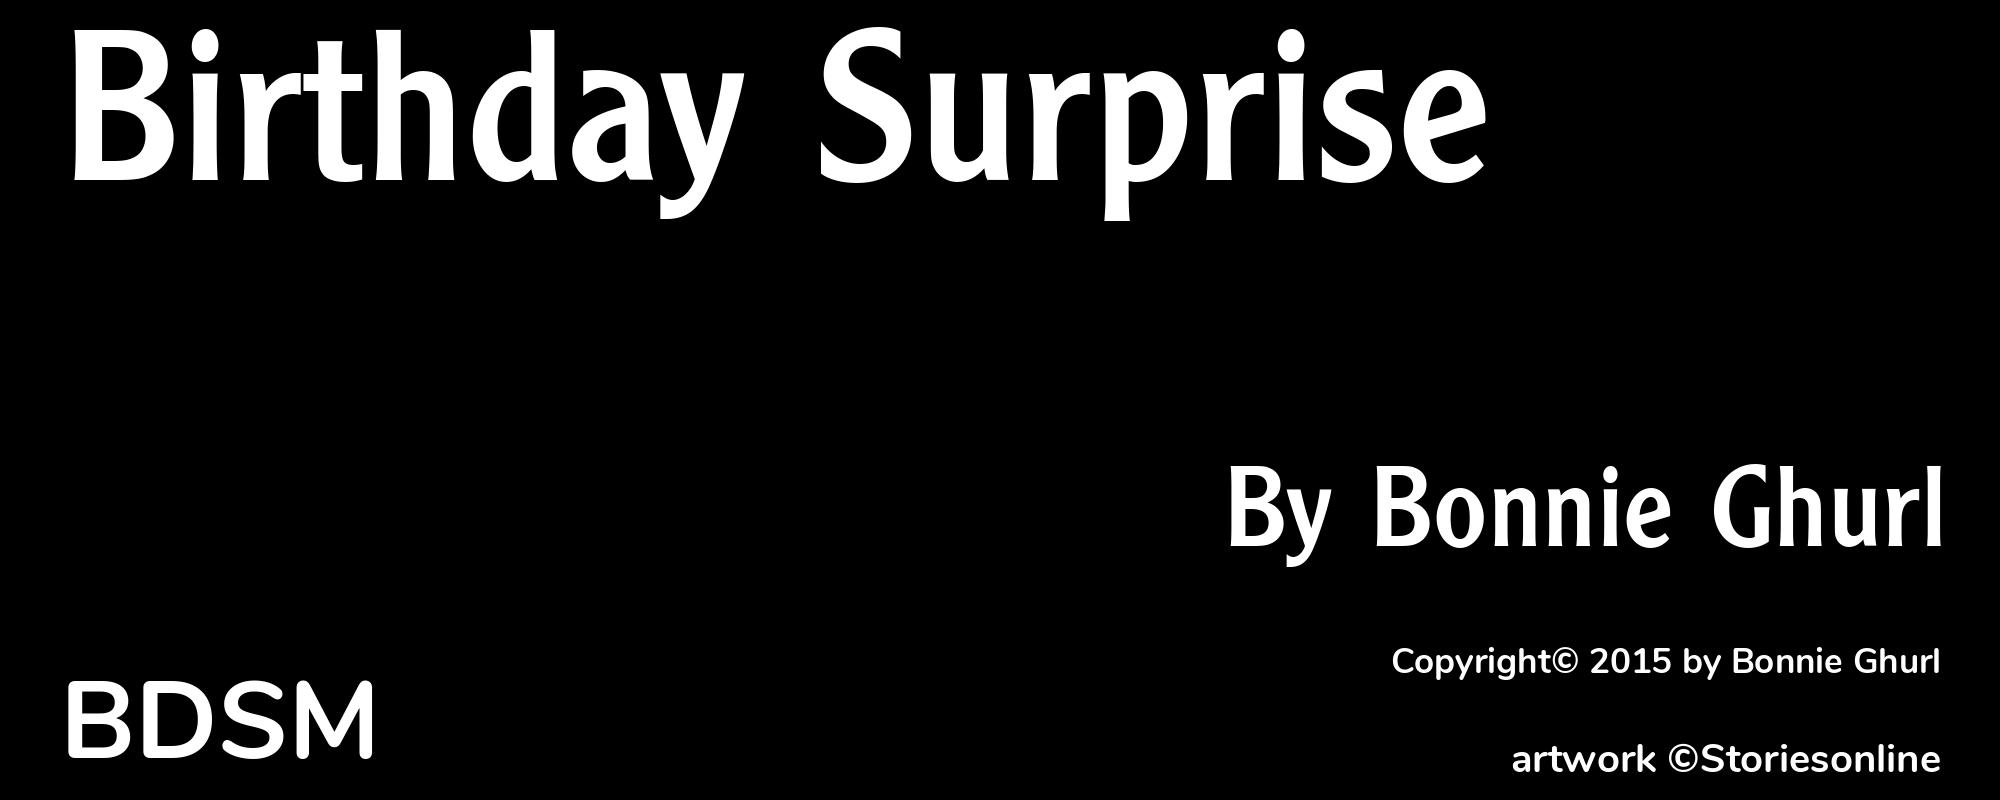 Birthday Surprise - Cover